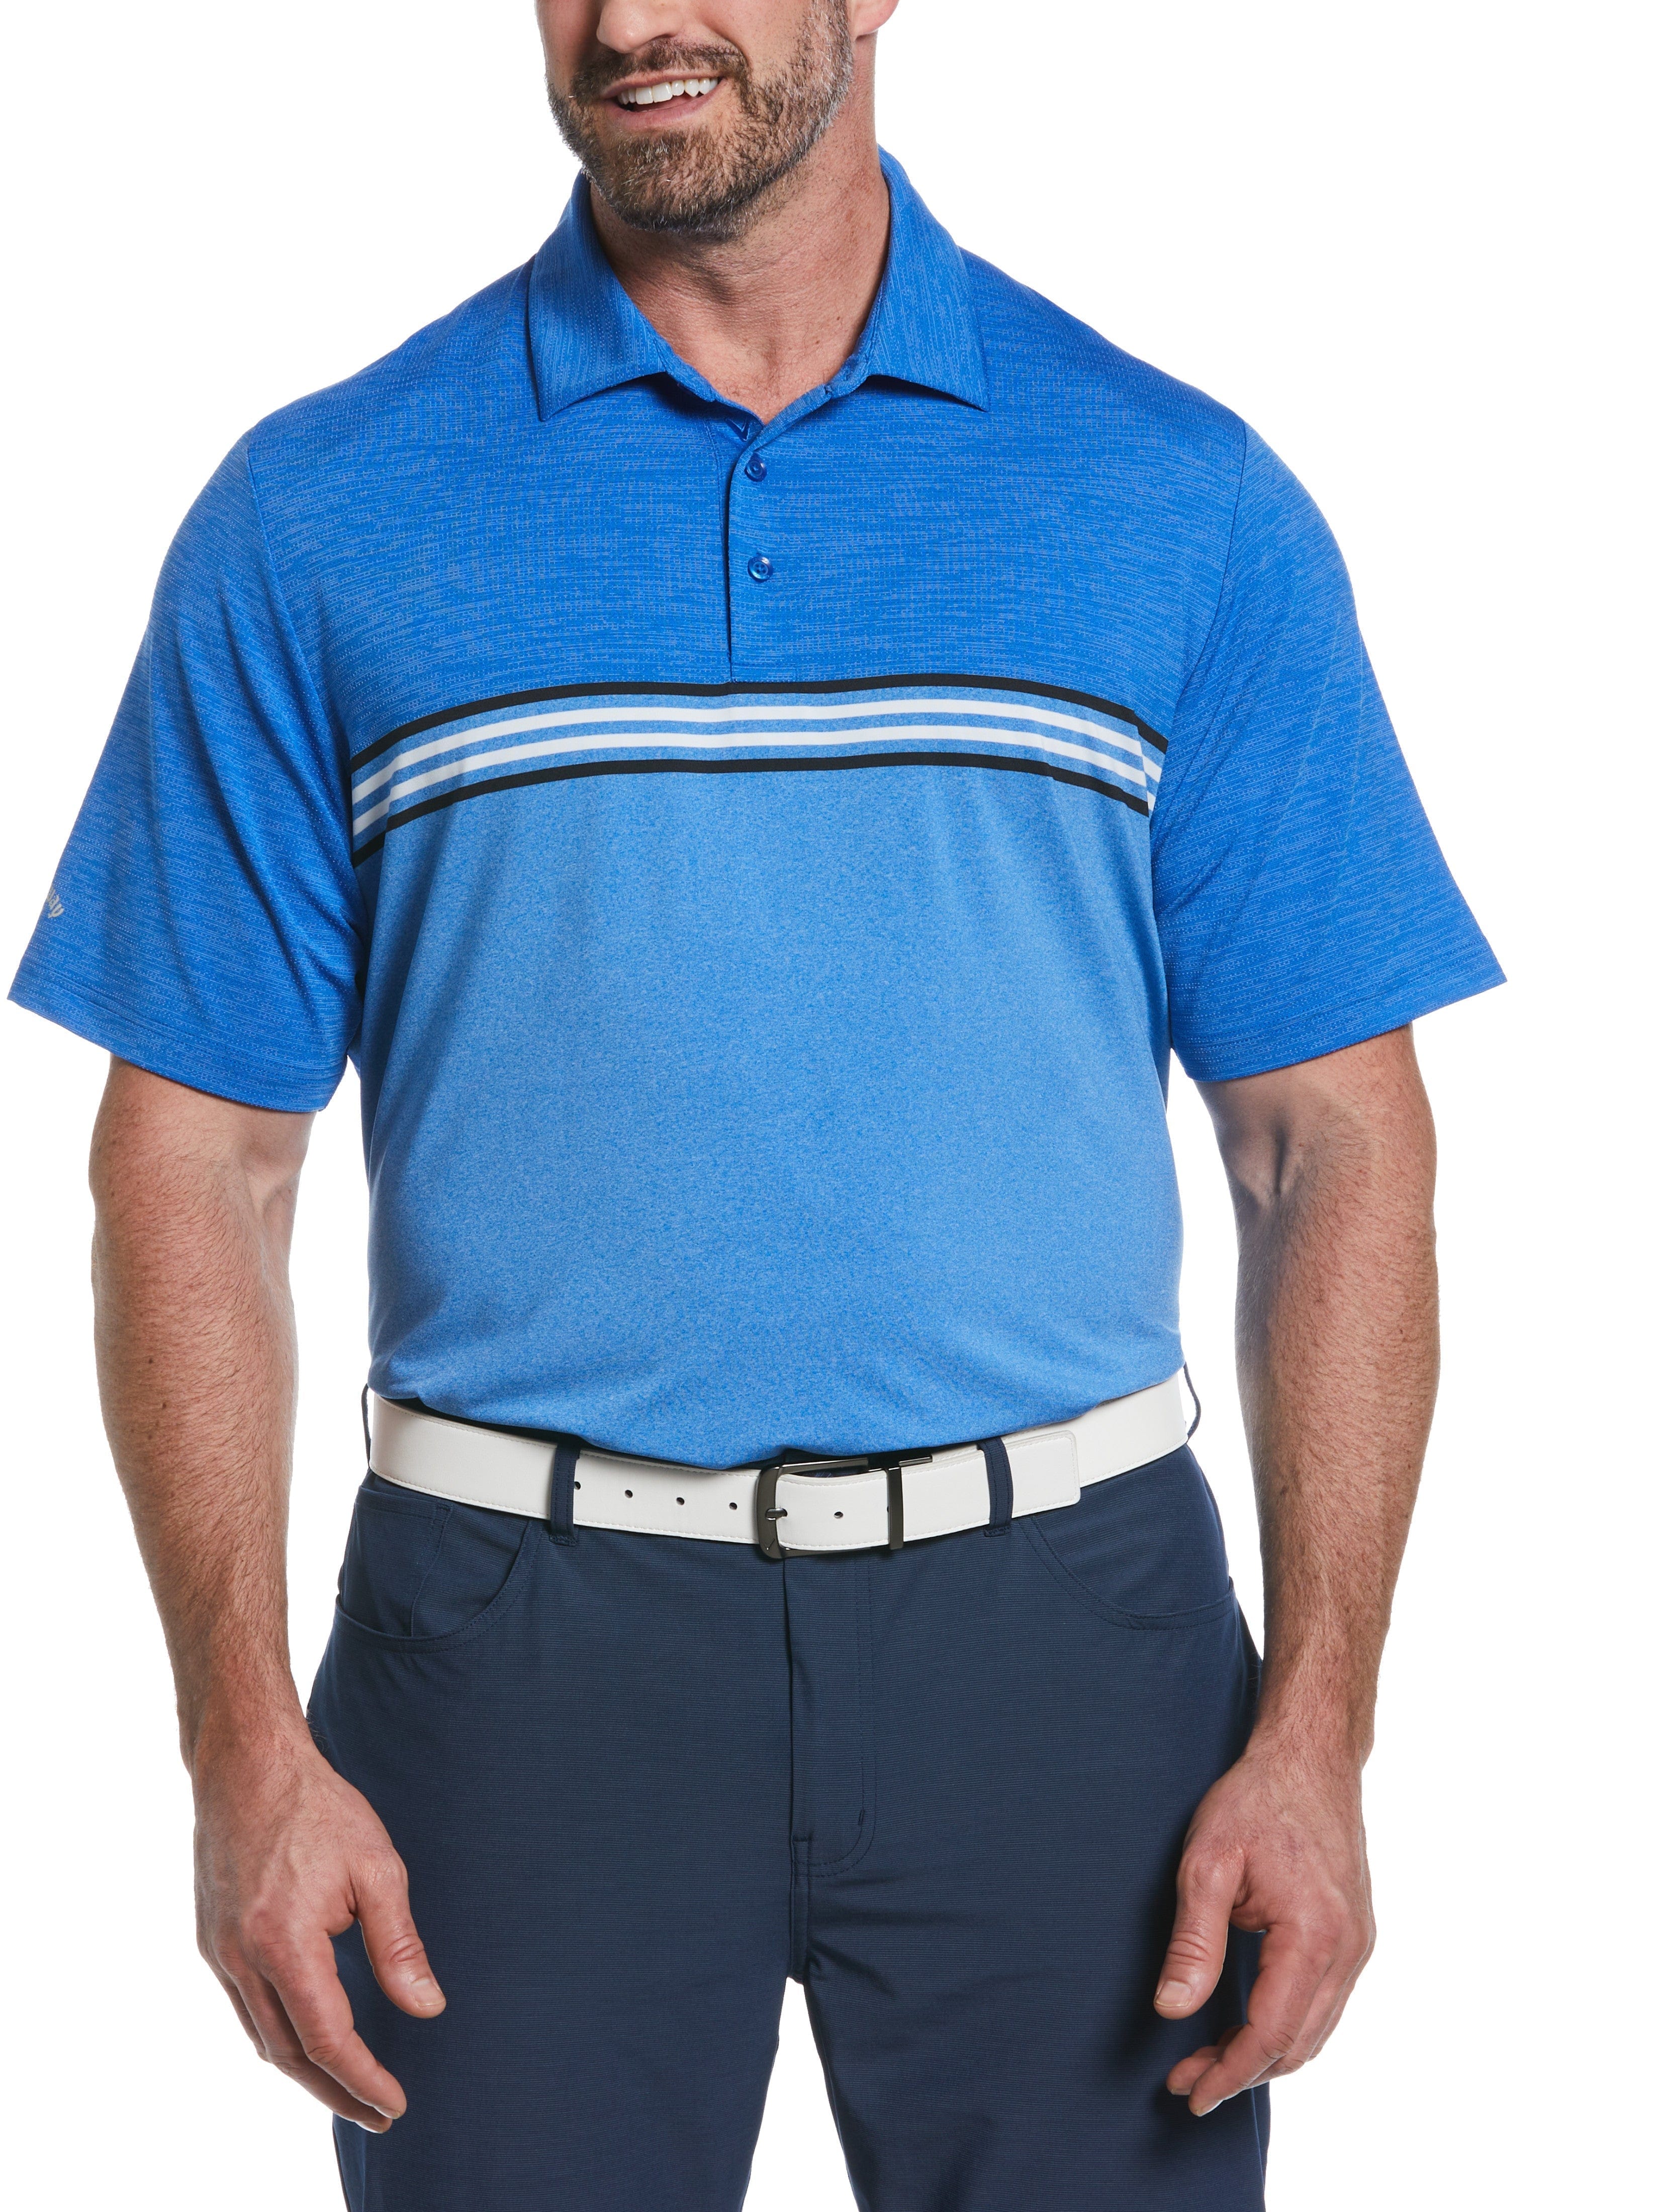 Callaway Apparel Mens Big & Tall Yarn Dyed Ventilated Jaspe Engineered Stripe Golf Polo Shirt, Size 3XLT, Magnetic Heather Blue, Polyester/Recycled P